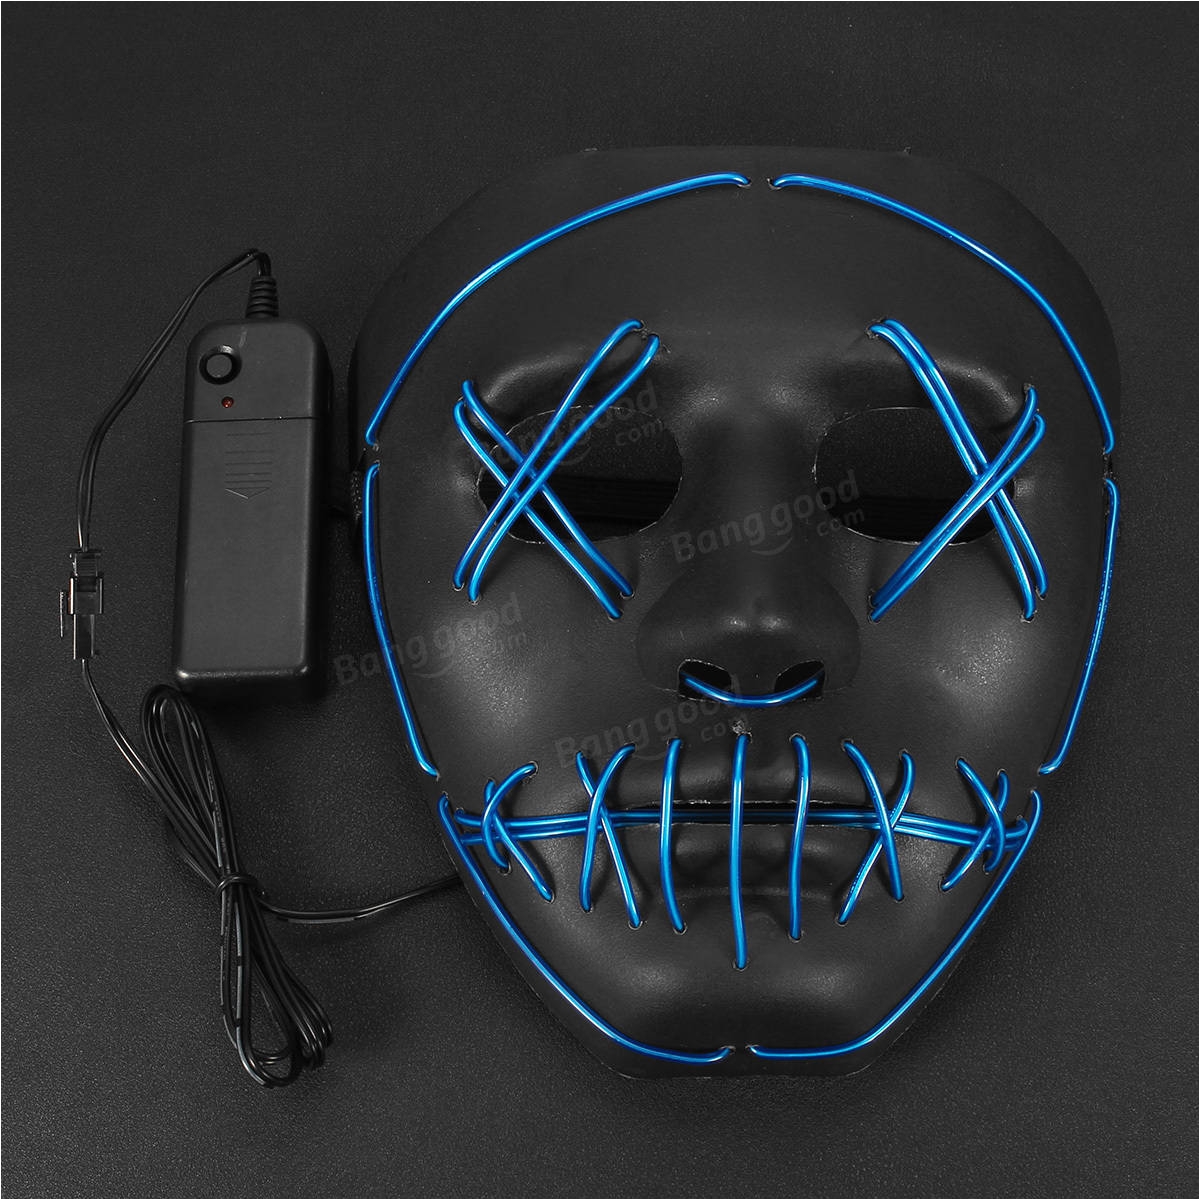 halloween led light up purge mask luminous skeleton el wire rave cosplay party 600x600 600x600 600x600 600x600